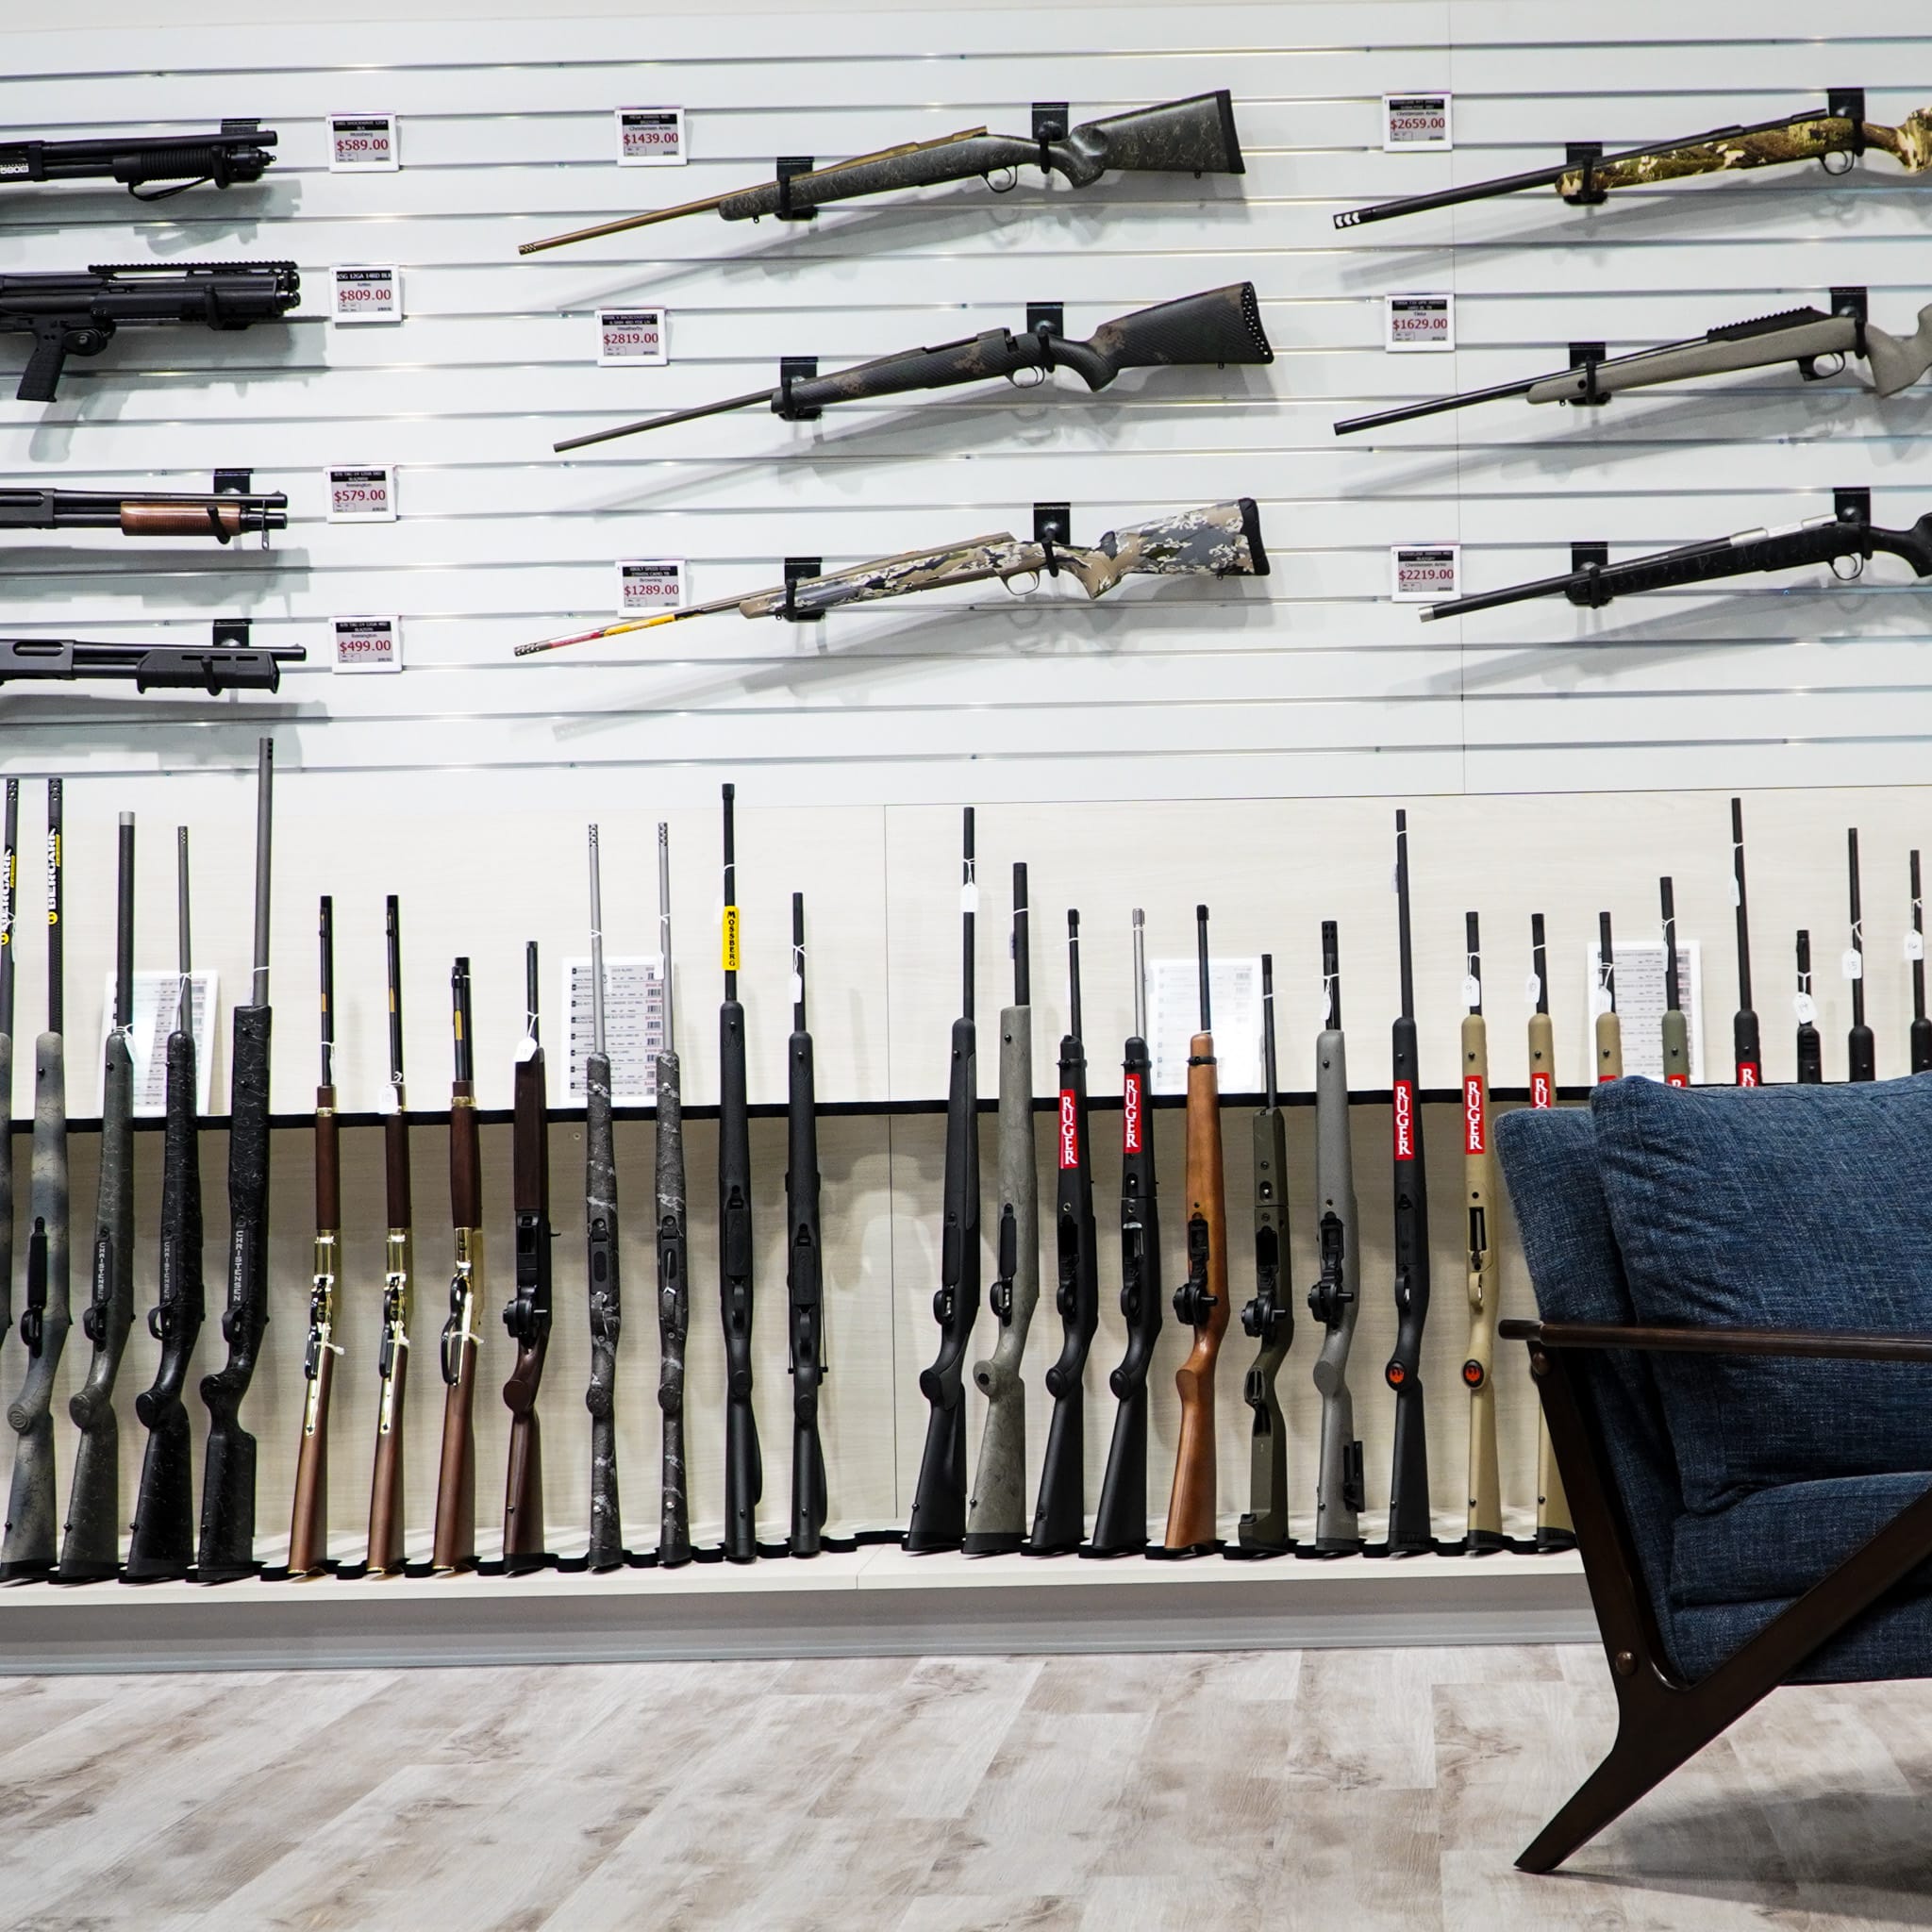 A wide assortment of hunting bolt action rifles